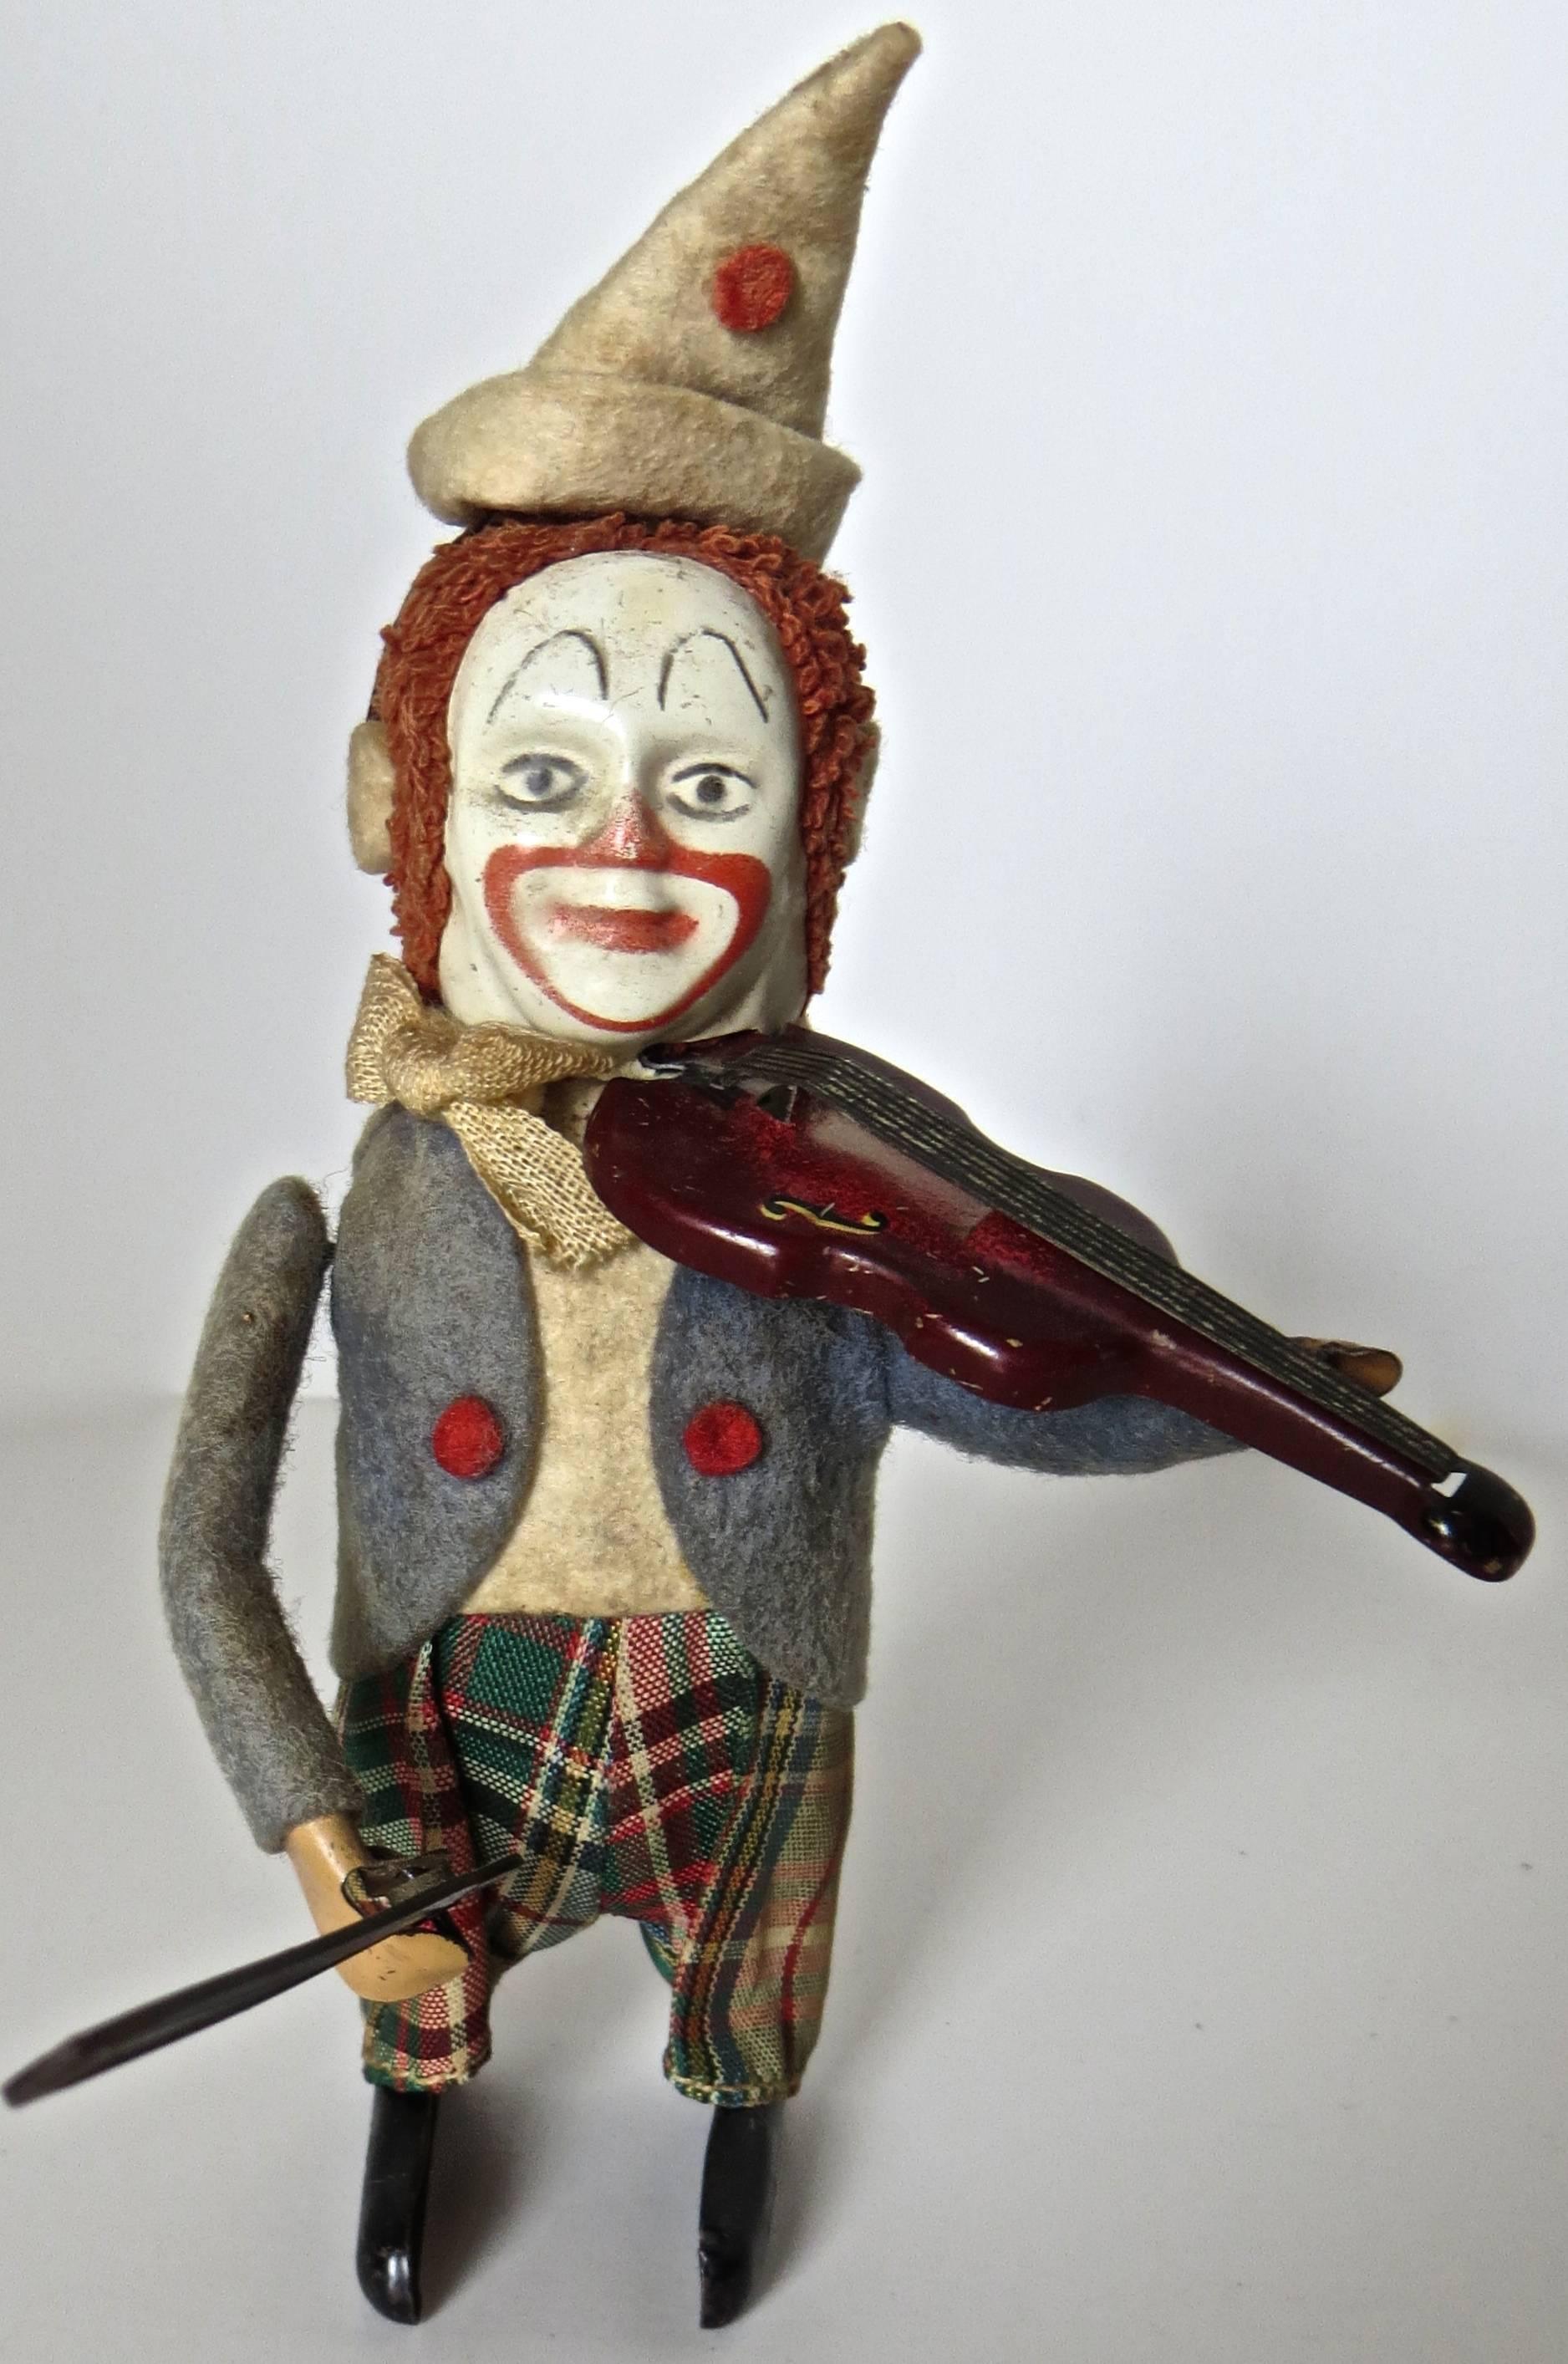 Entertaining clockwork toy that when wound up starts the clown playing his violin in a realistic motion while dancing around at the same time. Excellent condition for this toy, manufactured by the Schuco Company of Germany, circa 1940s. Hand-painted